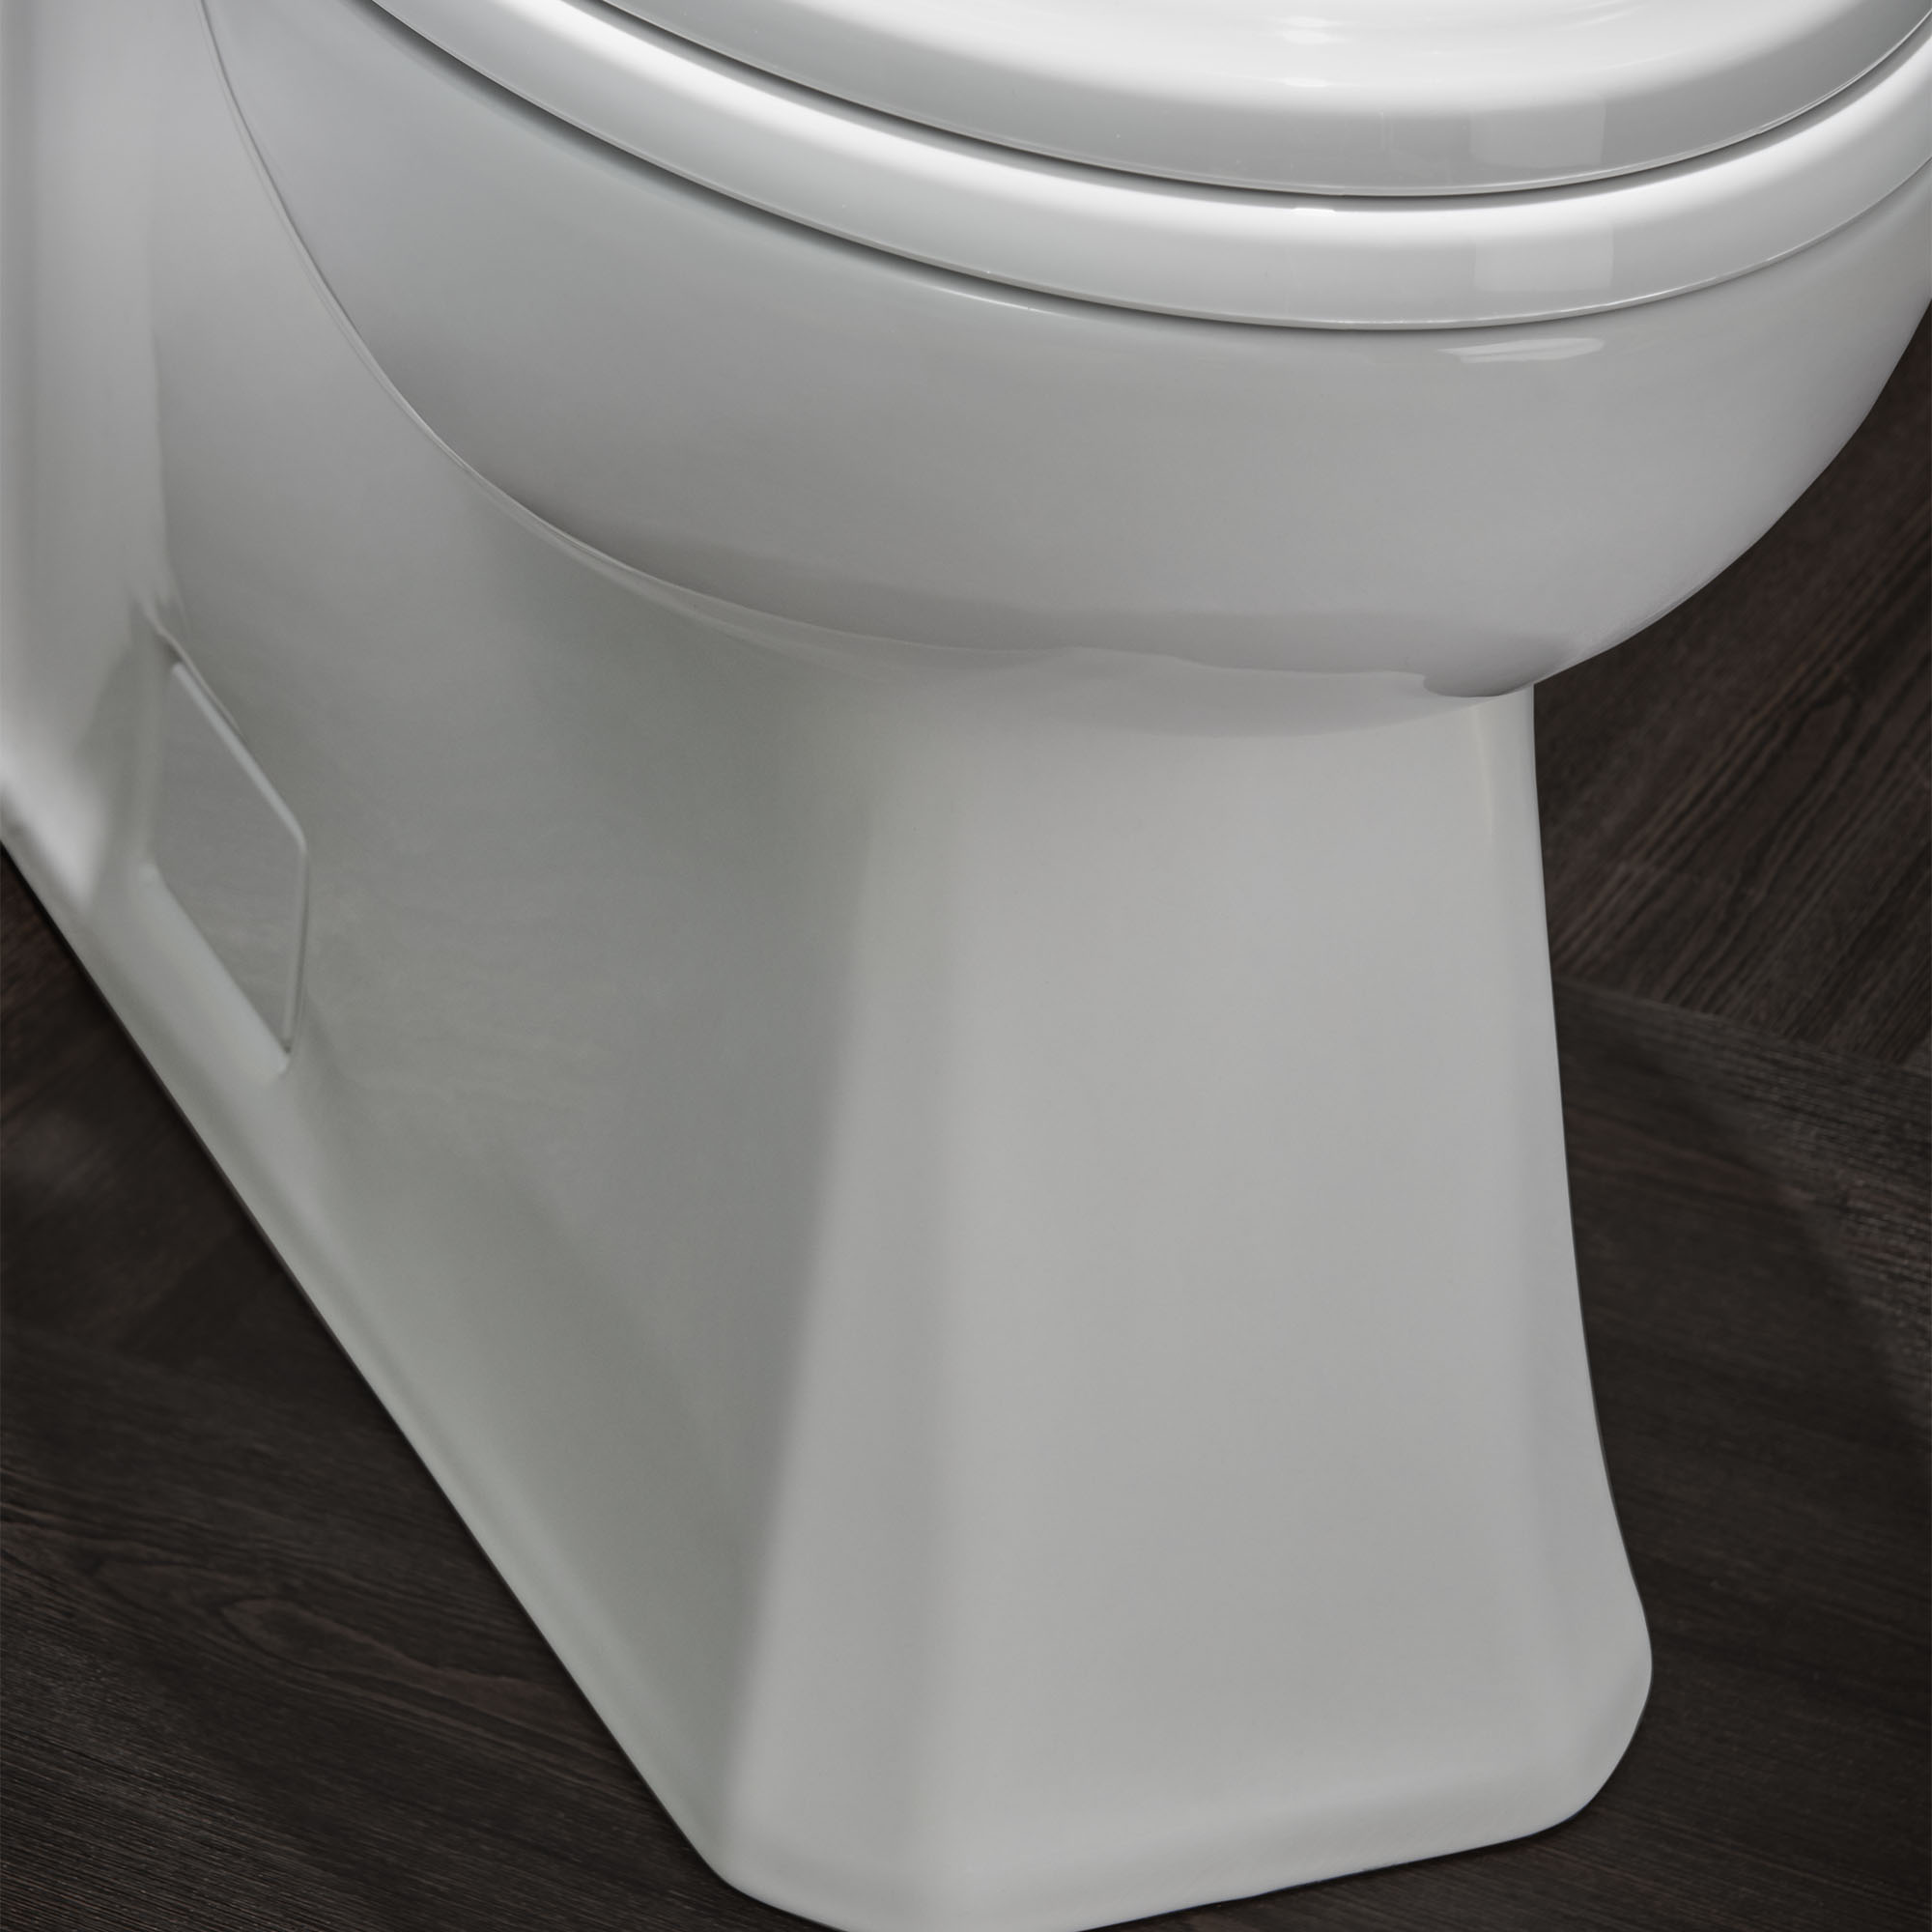 Belshire™  One-Piece Chair Height Elongated Toilet with Seat